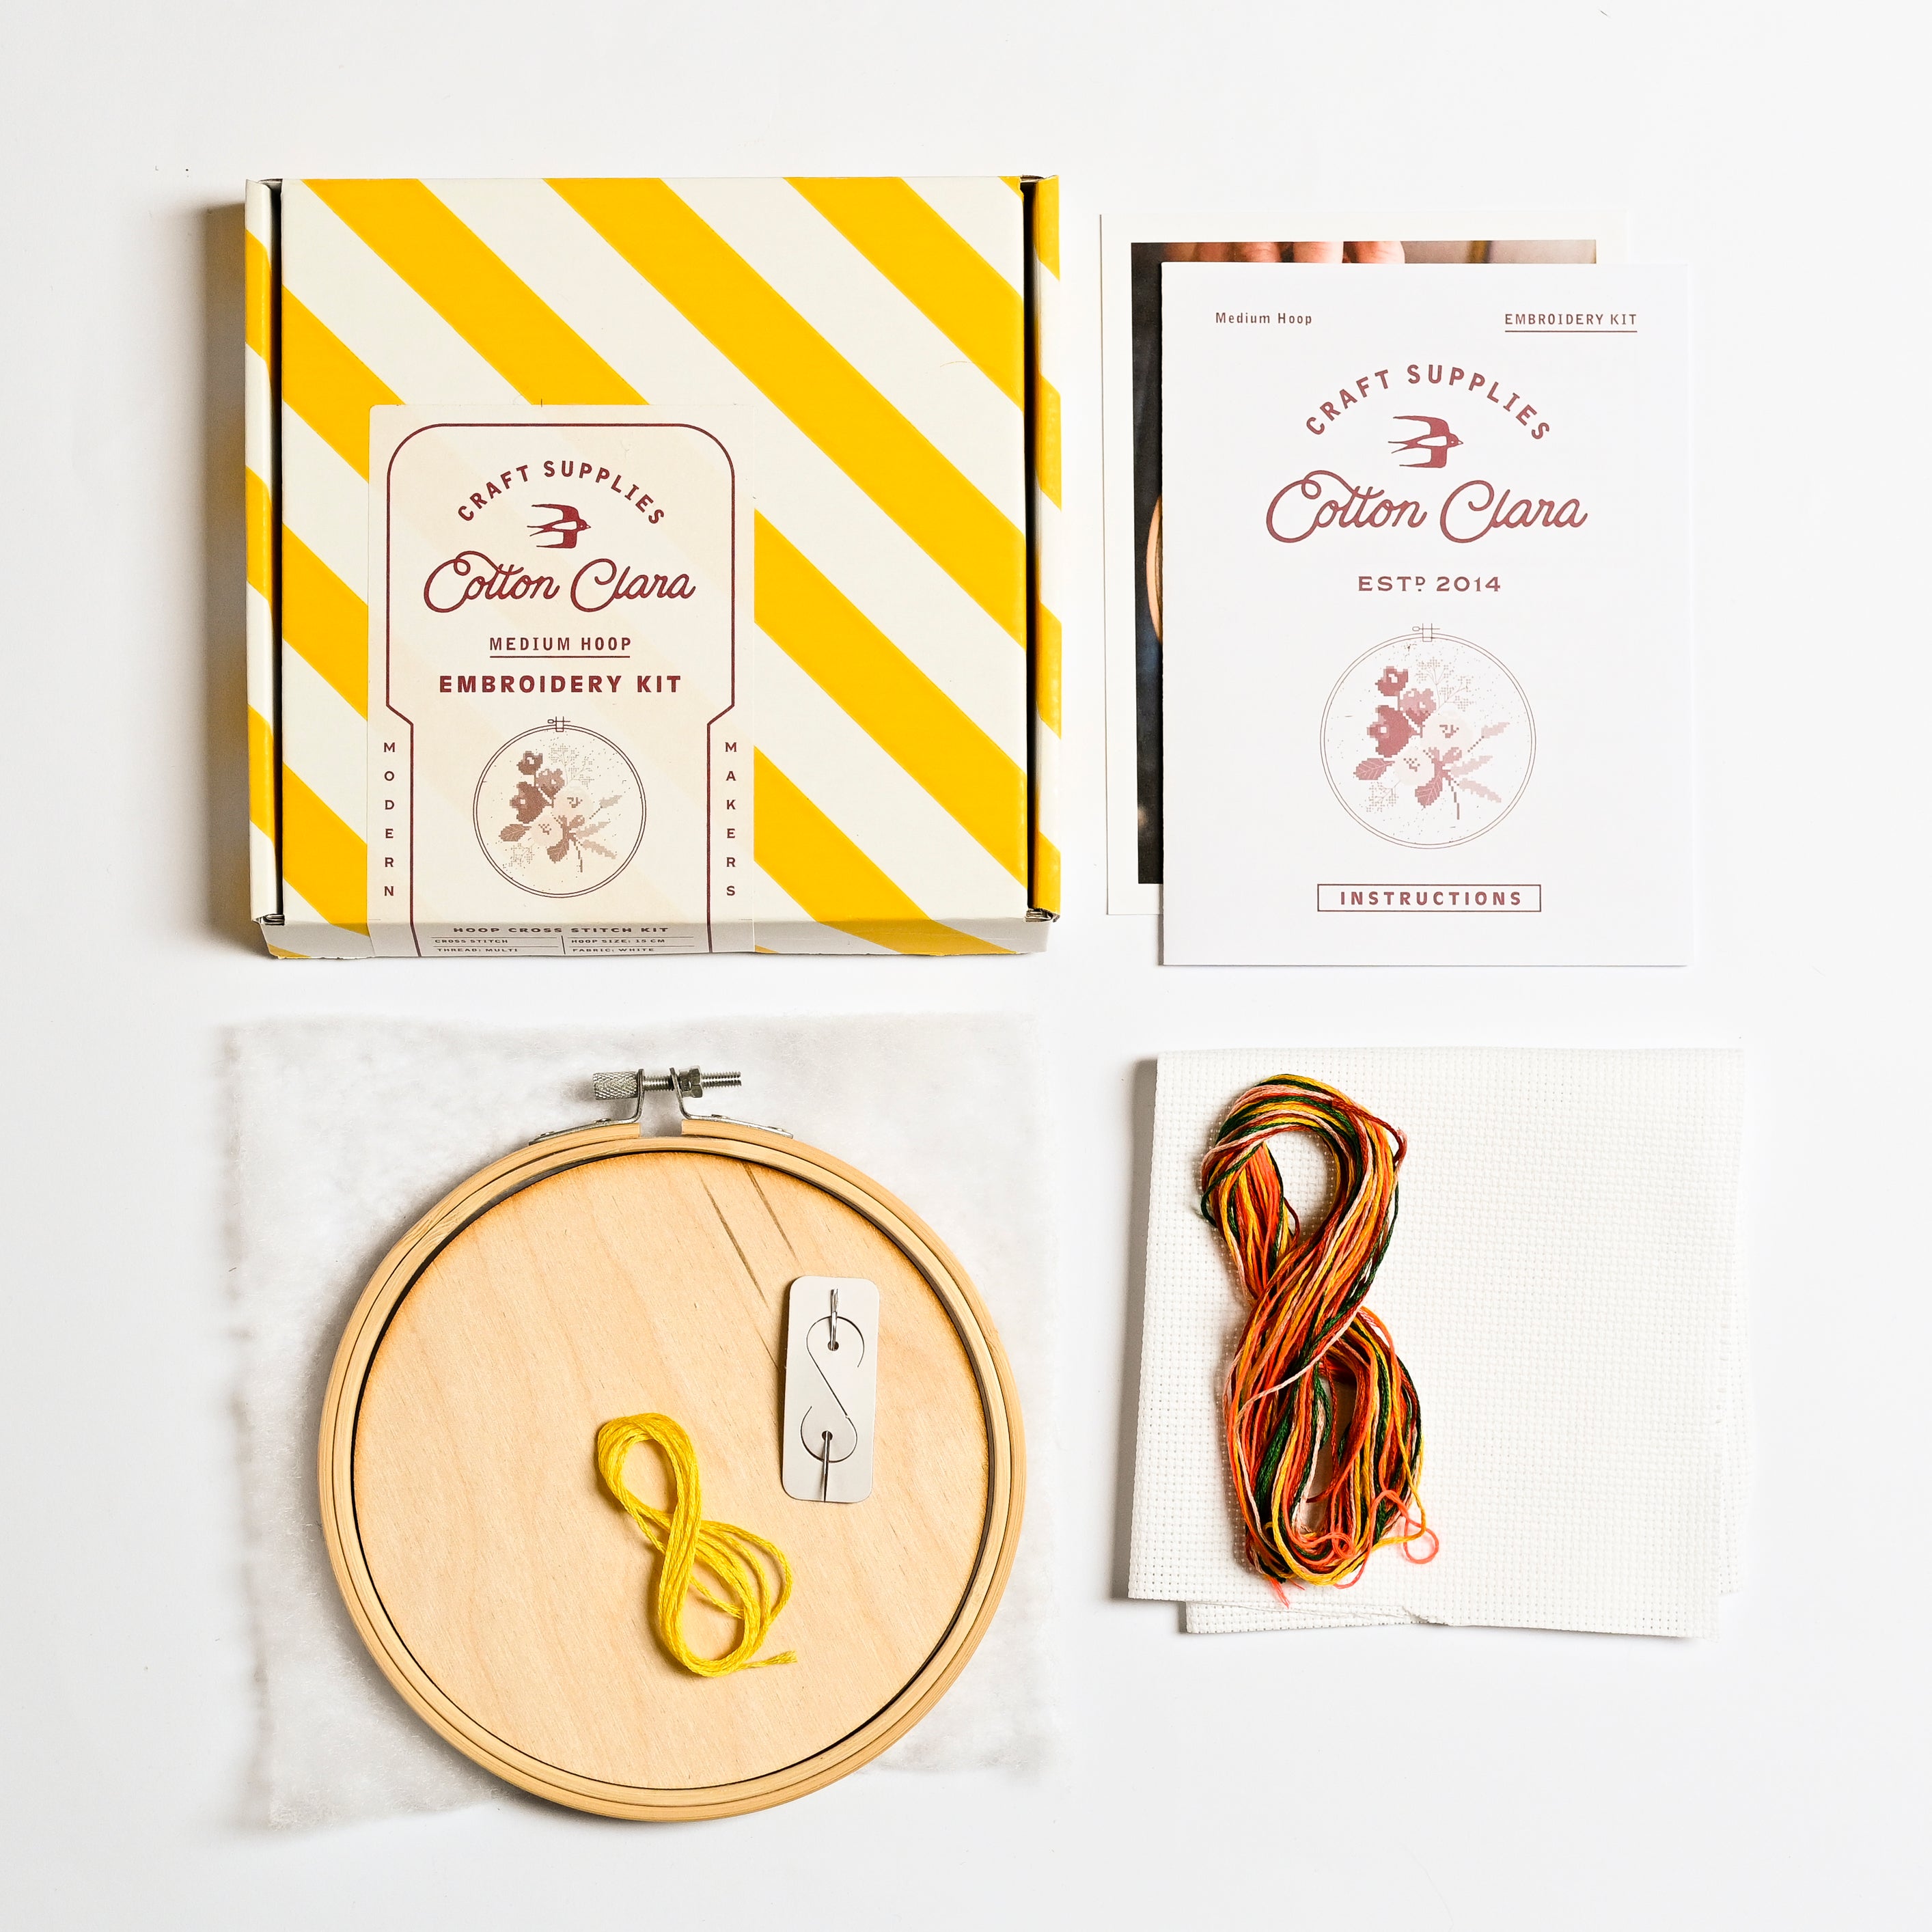 The embroidery kit box and it's contents are displayed. The box has yellow and white stripes, with instructions on white card with orange text. A embroidery hoop has a loop of yellow string whilst a collection of yellow and orange strings are in a loop together.